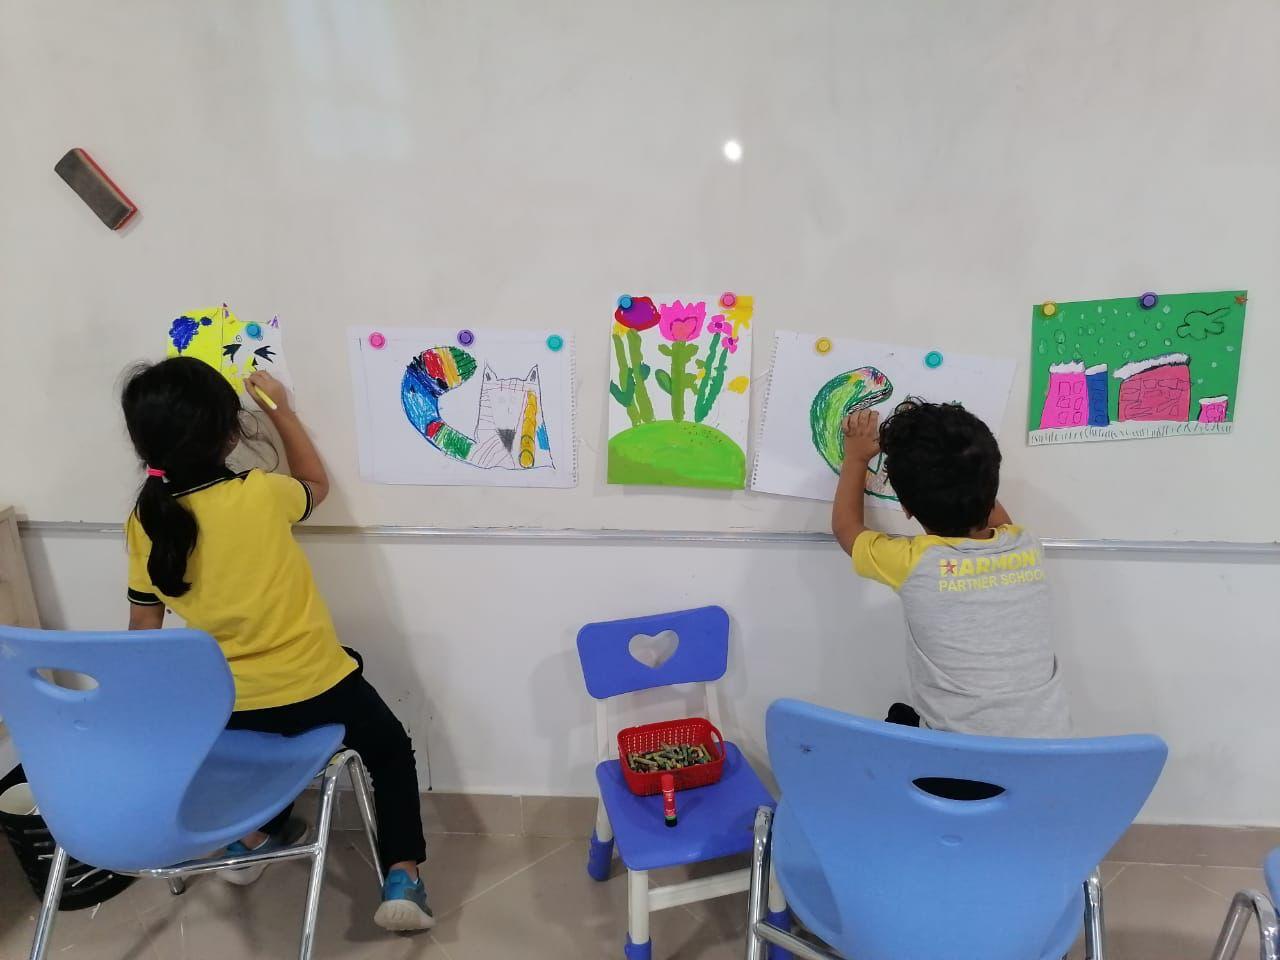 Children engaged in a creative activity in a classroom setup at IVY STEM International School. They are working on colorful drawings displayed on the white wall, showcasing artistic expression and educational engagement.